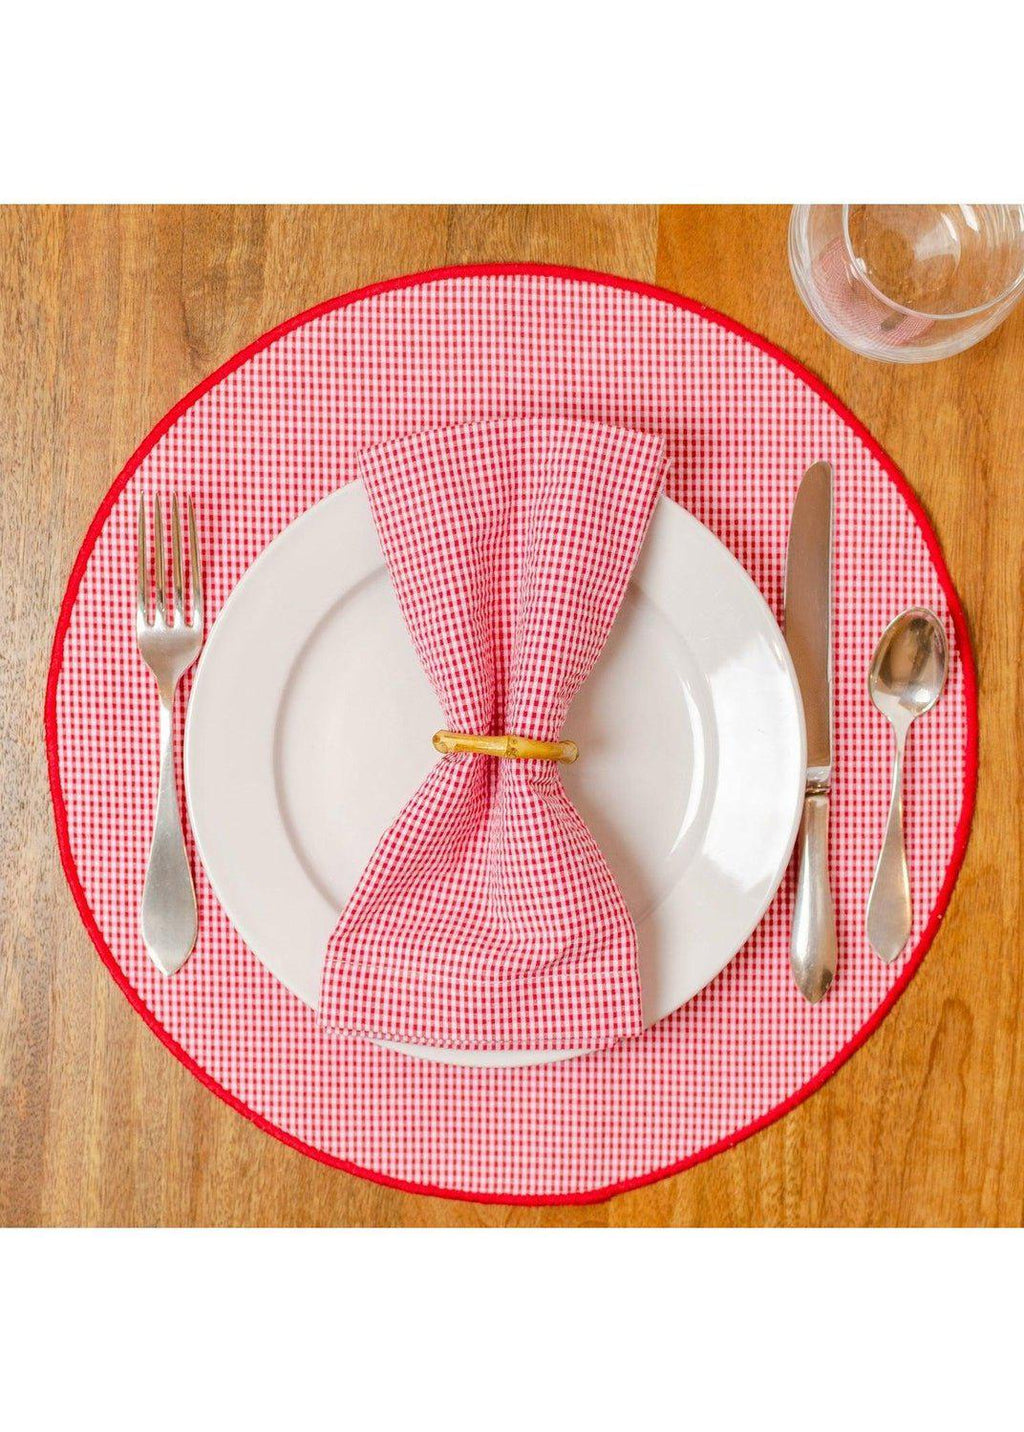 Placemat, Round - Red Gingham Check/Red-2